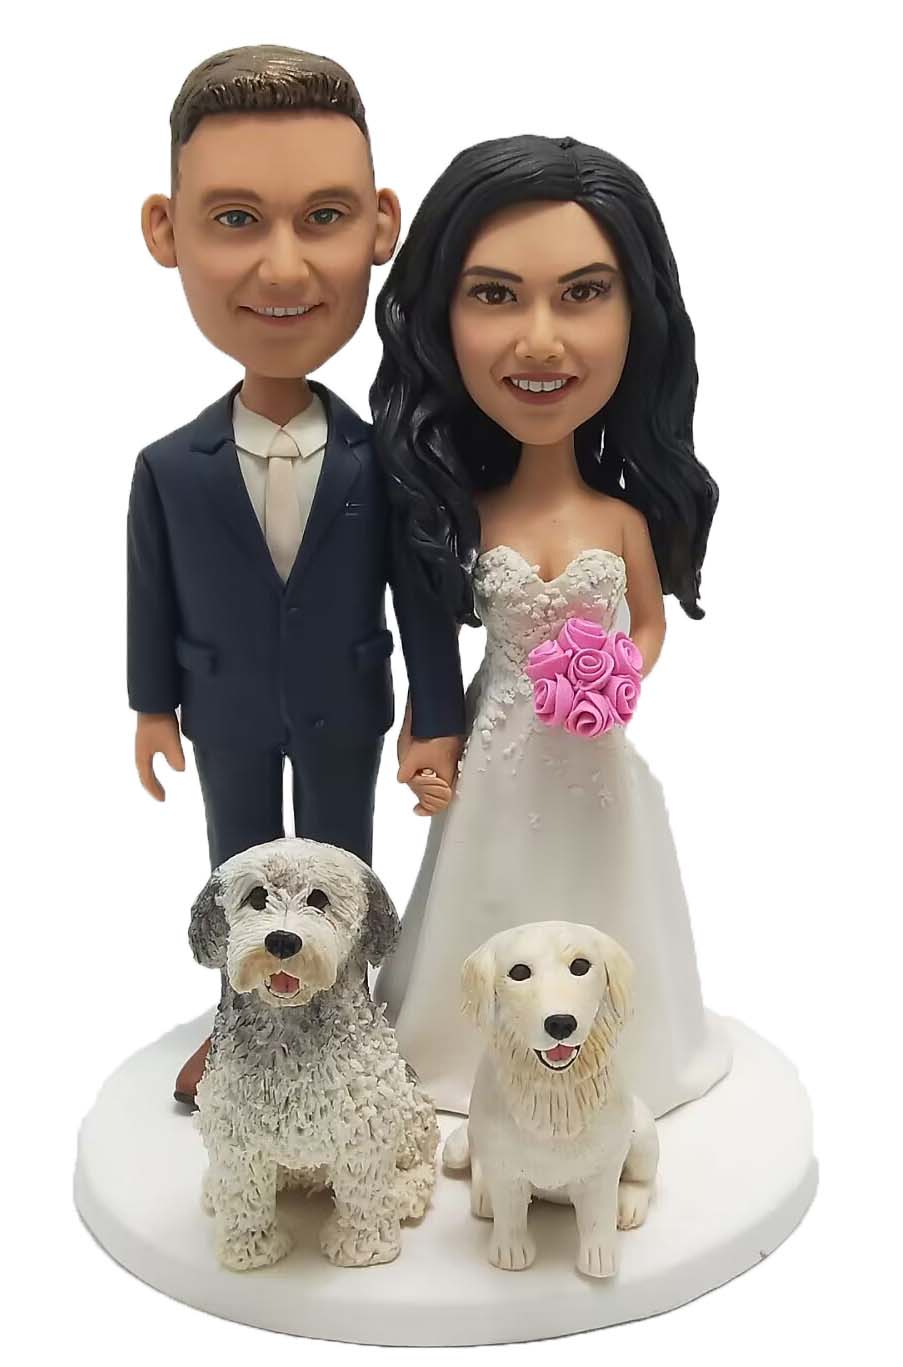 Custom cake topper personalized wedding cake toppers（No Pets）